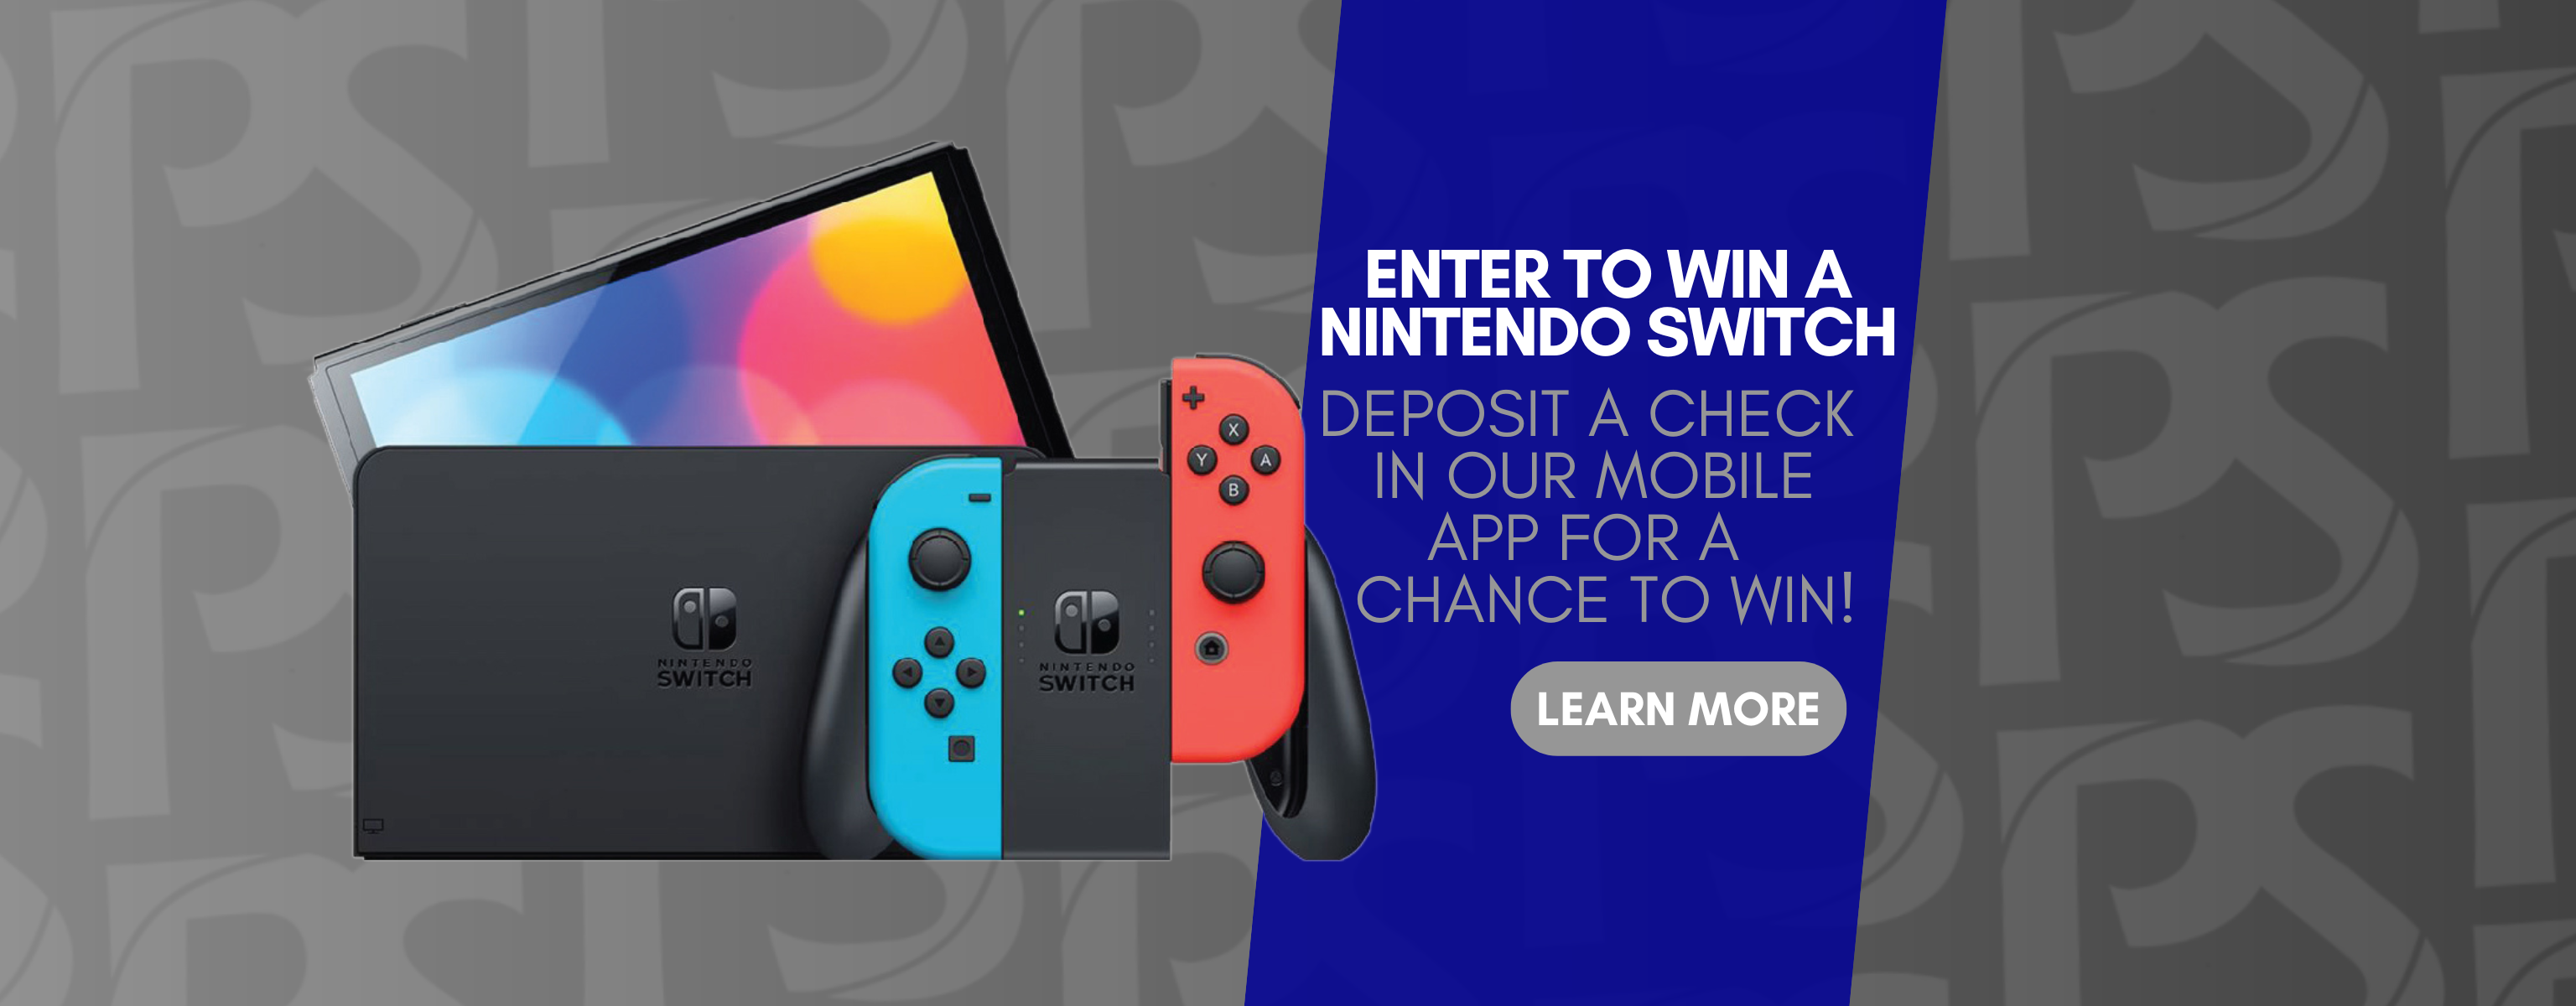 Enter to win a Nintendo switch. Deposit a check in our Mobile App for a chance to win